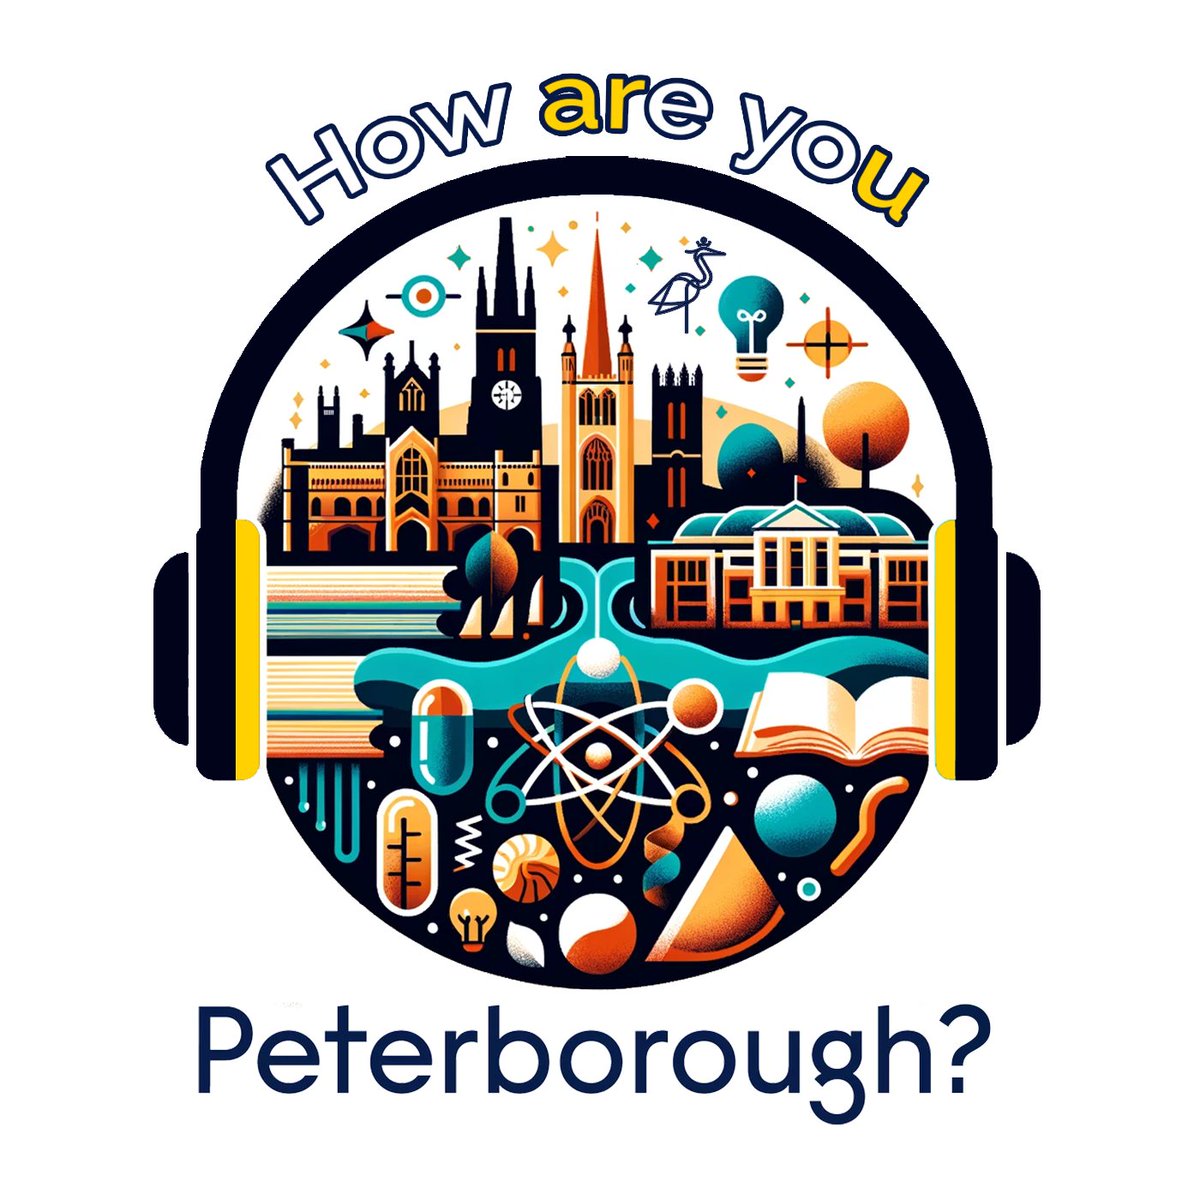 Listen to the latest 'How Are You, Peterborough?' podcast with Dr Cheryl Greyson and James Larner at ARU Peterborough and guest, Senior Lecturer Practitioner, Agri-Food Technology, Marcus Bellet-Travers to explore the Agricultural Drone Revolution: ow.ly/Cxug50RvRR5